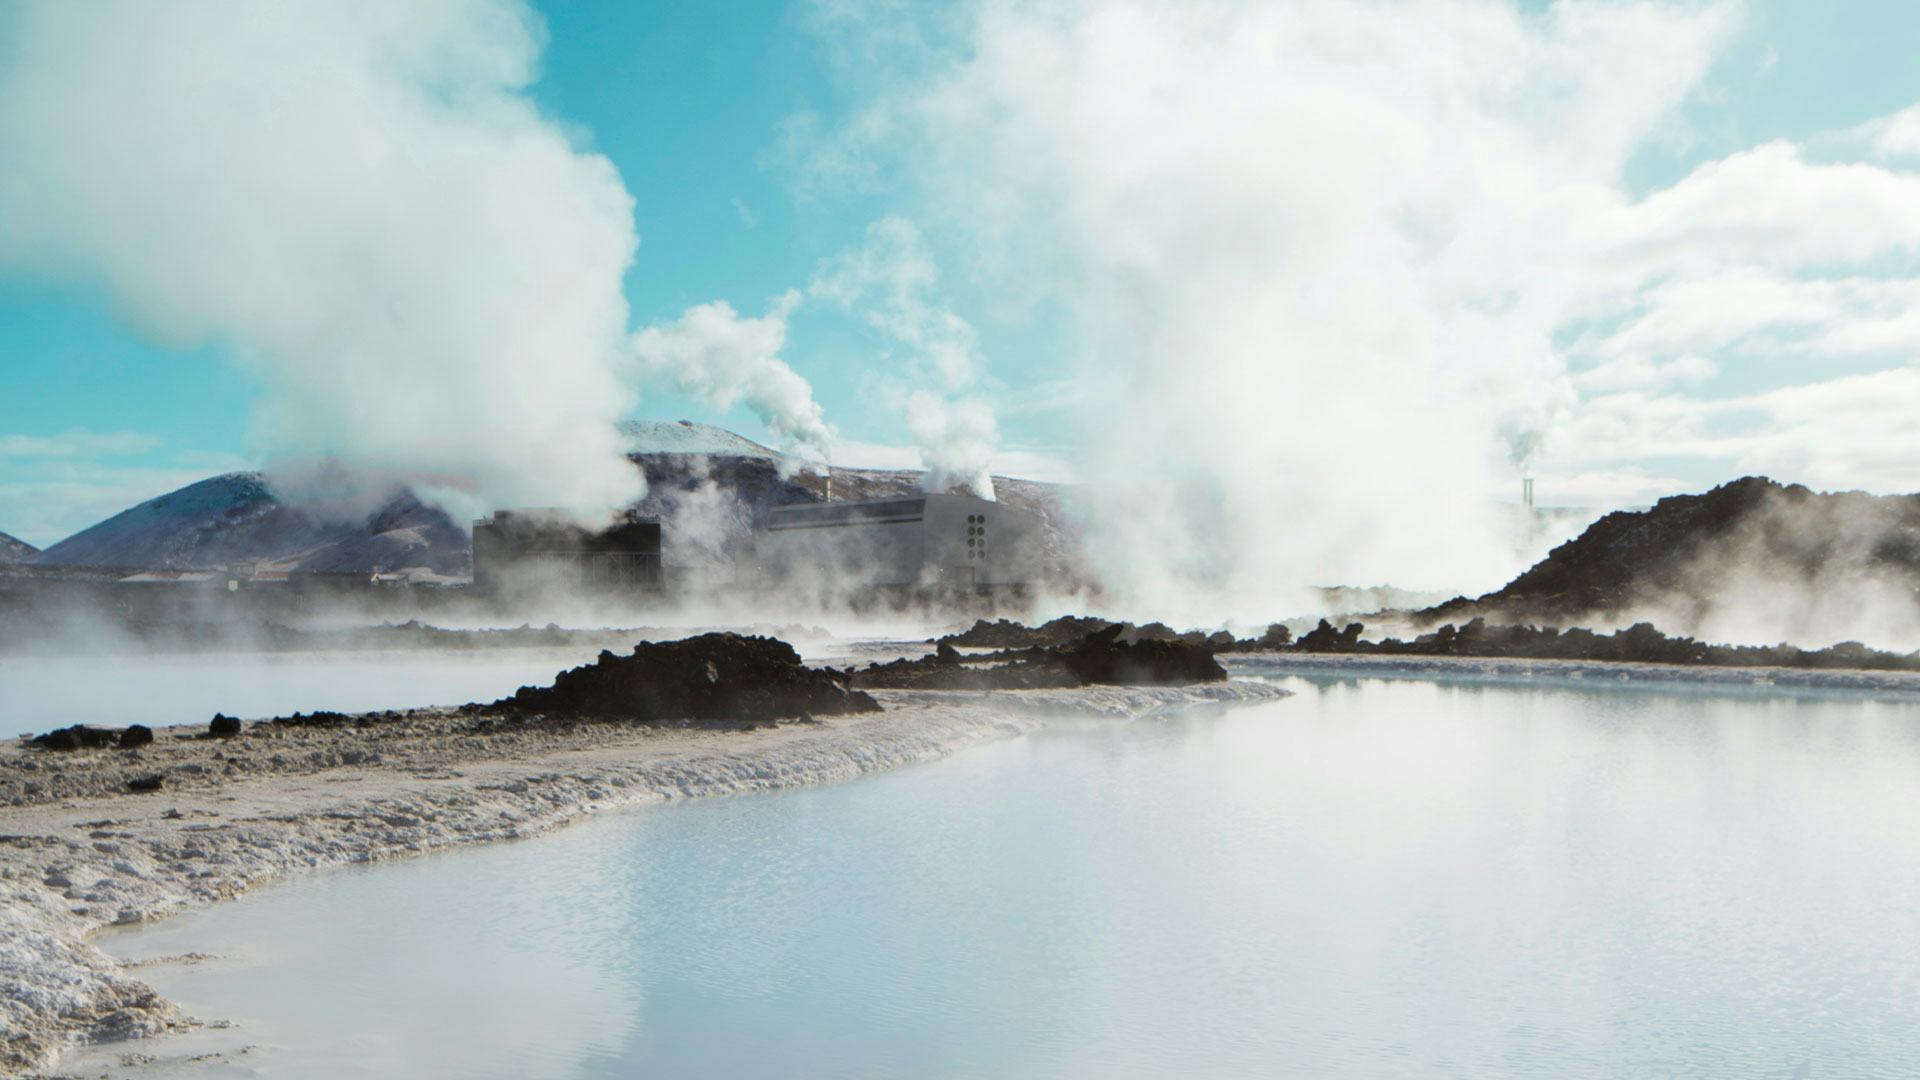 Hot steam coming from geothermal water